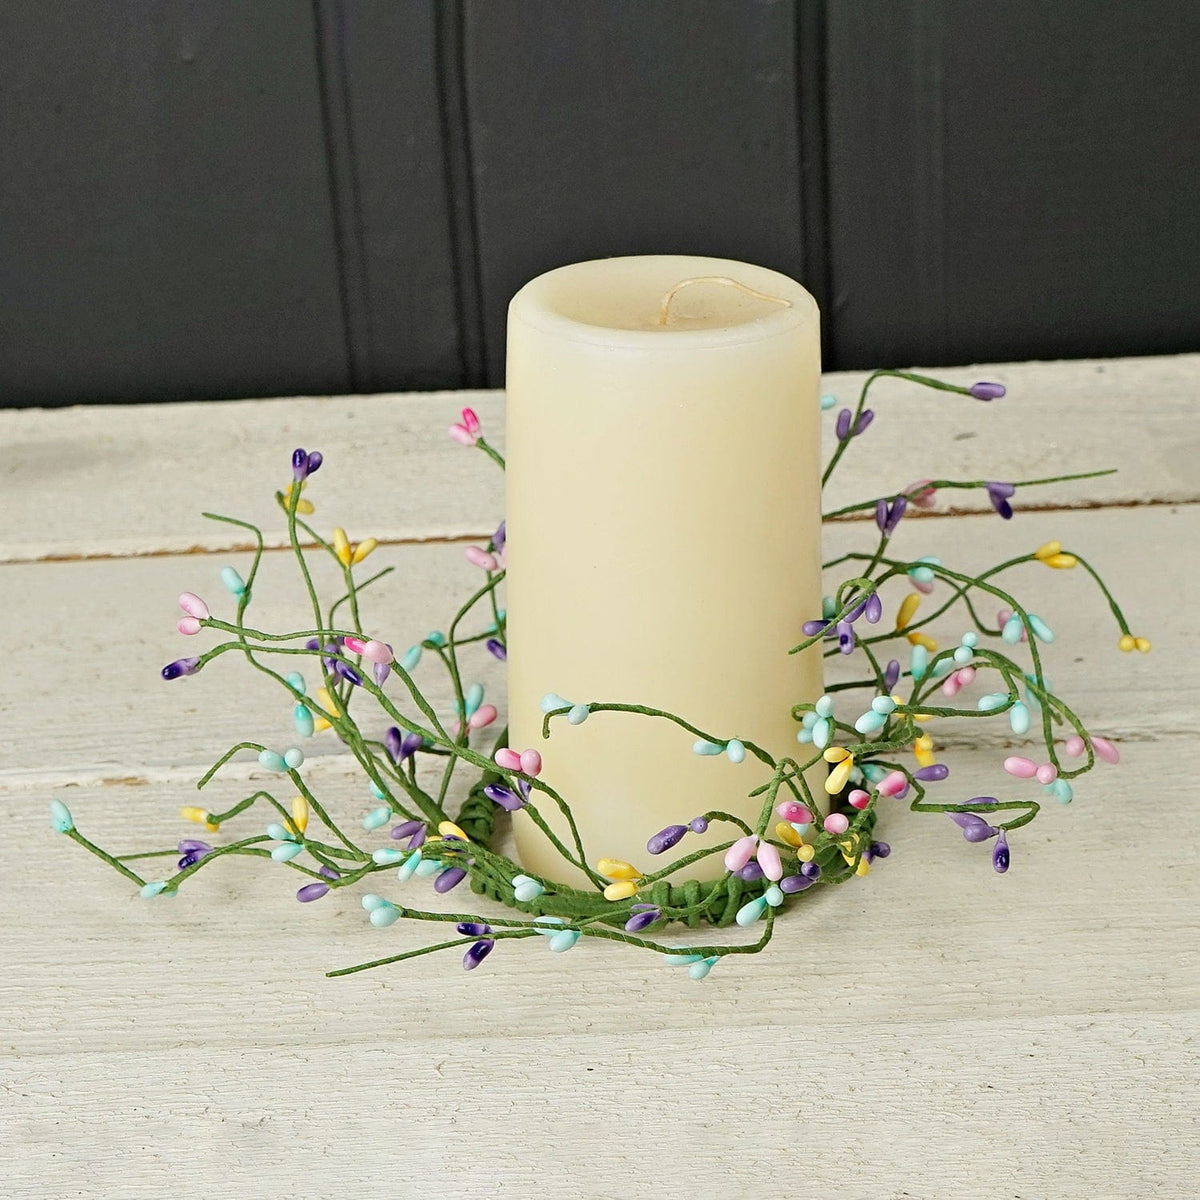 Pip Berry - Happy Spring Candle Ring / Wreath 3.5&quot; Inner Diameter